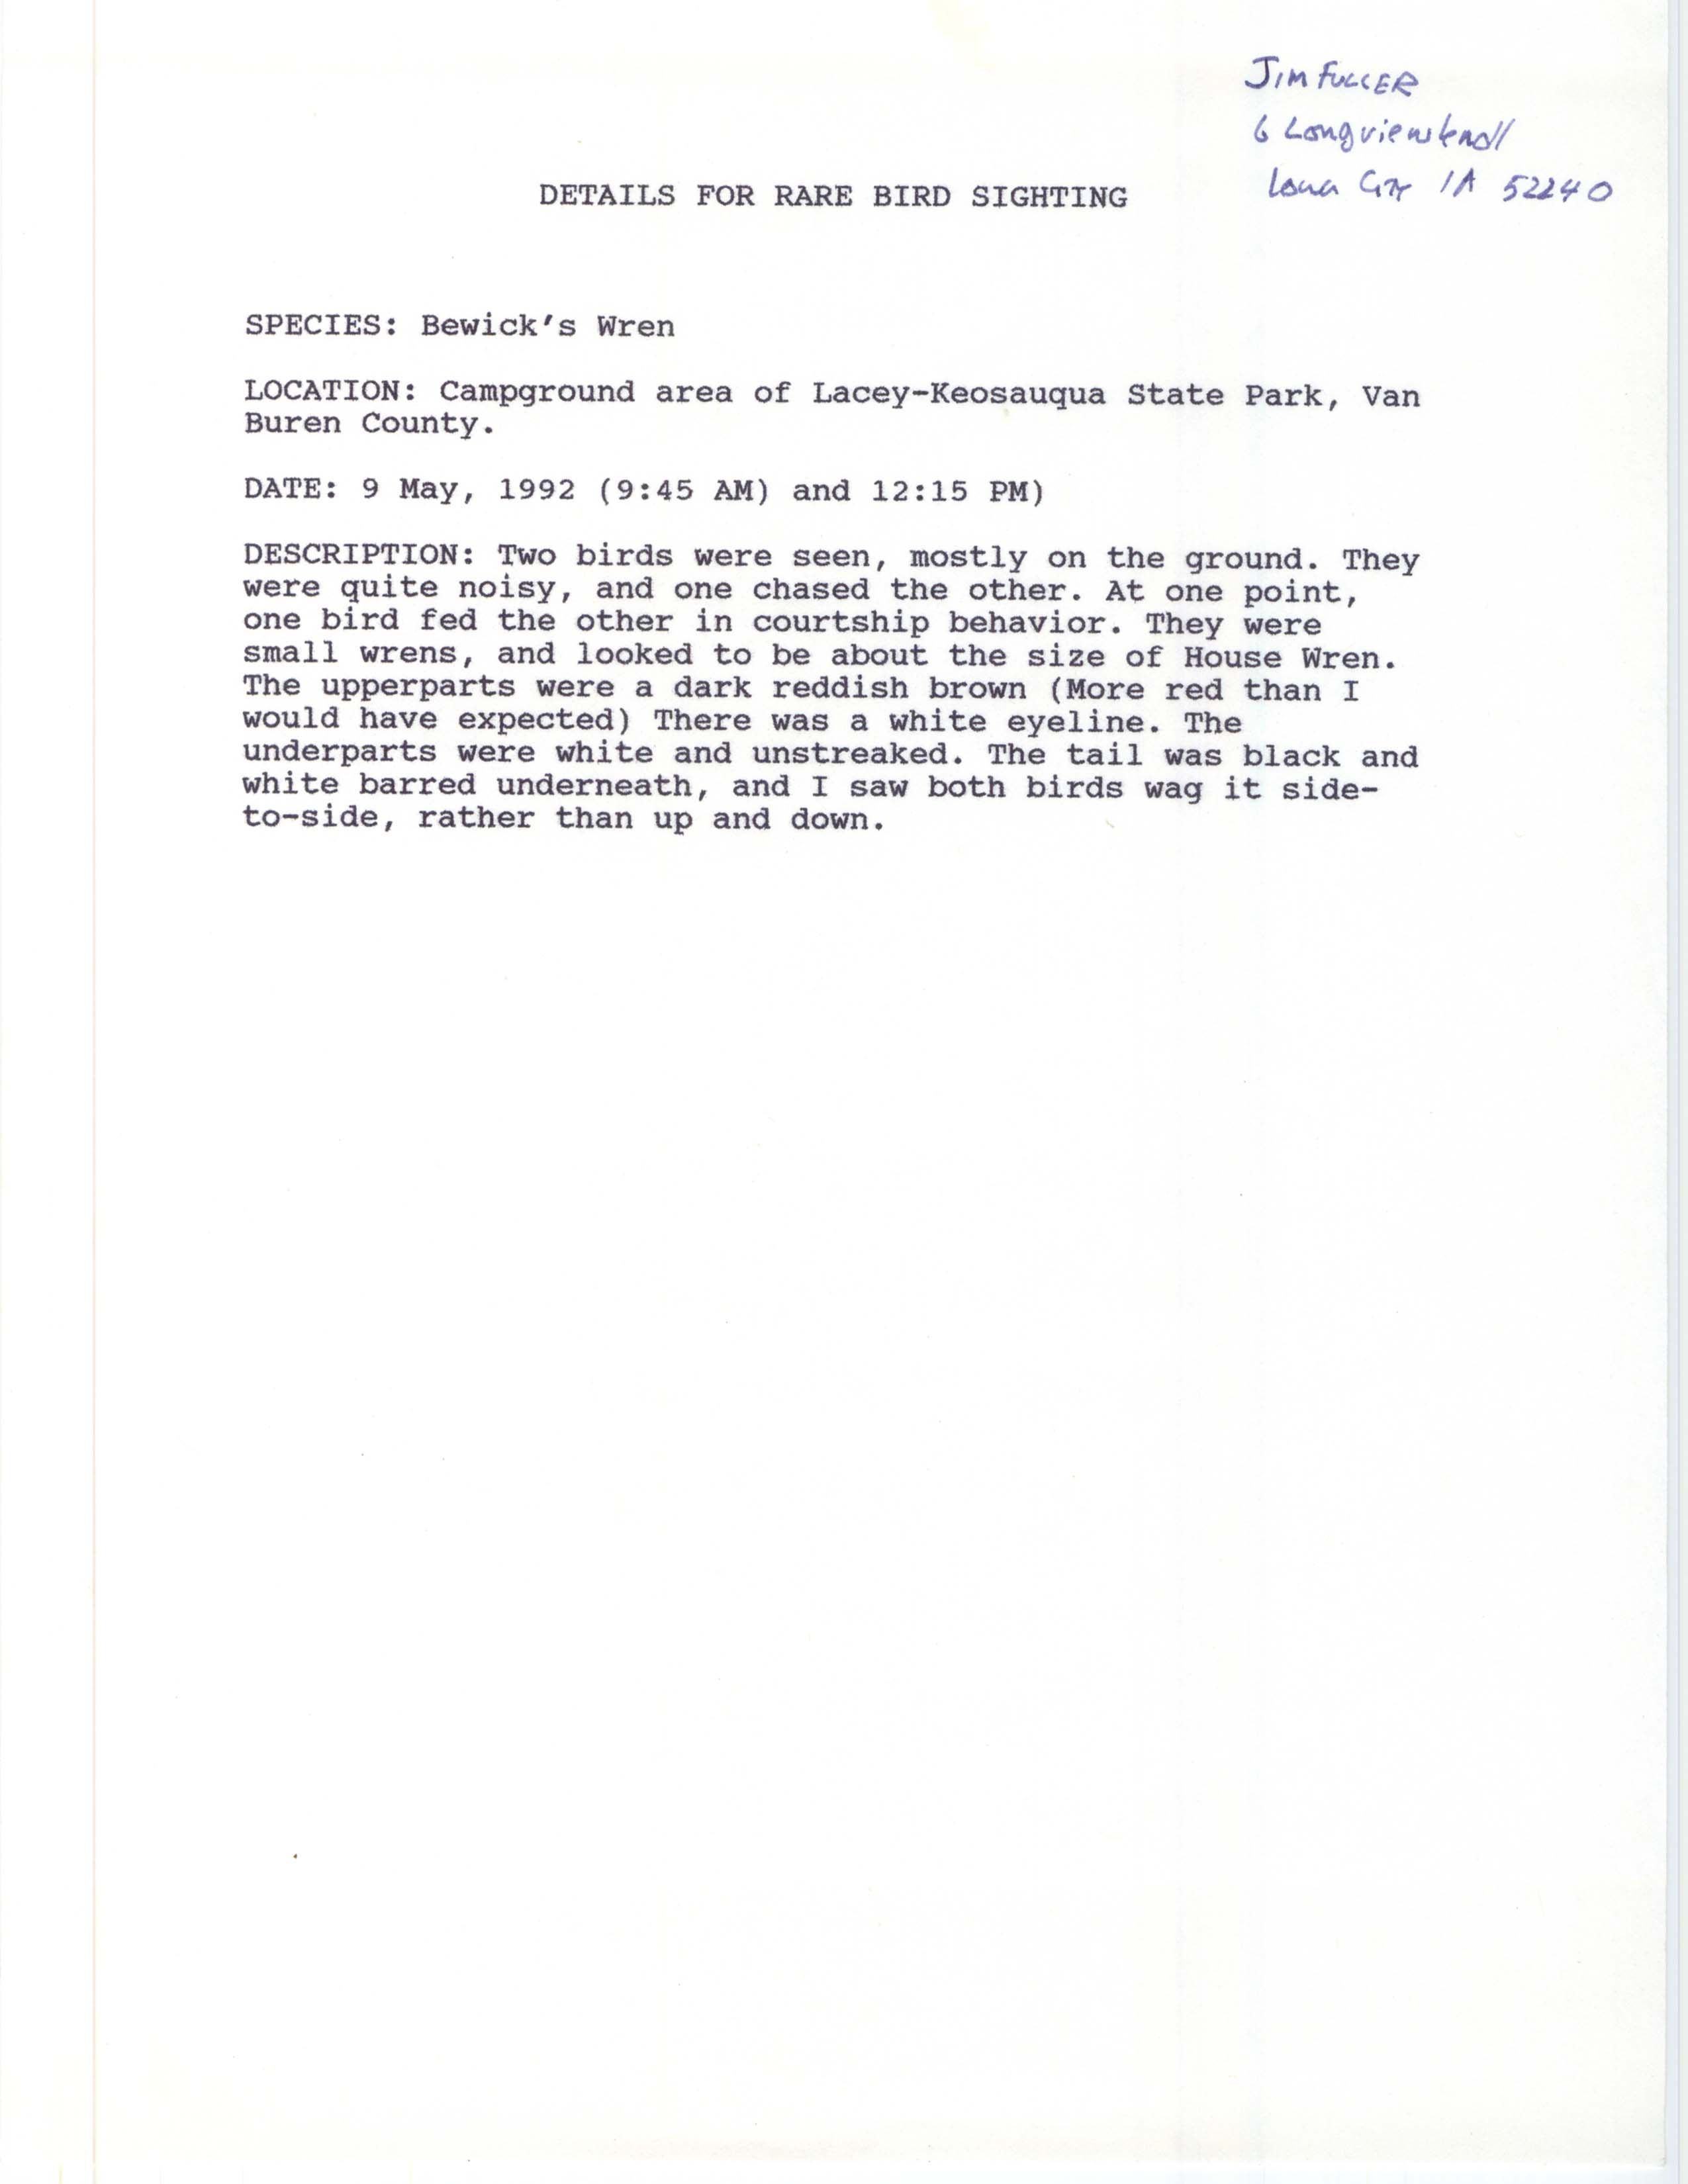 Rare bird documentation form for Bewick's Wren at Lacey-Keosauqua State Park in 1992